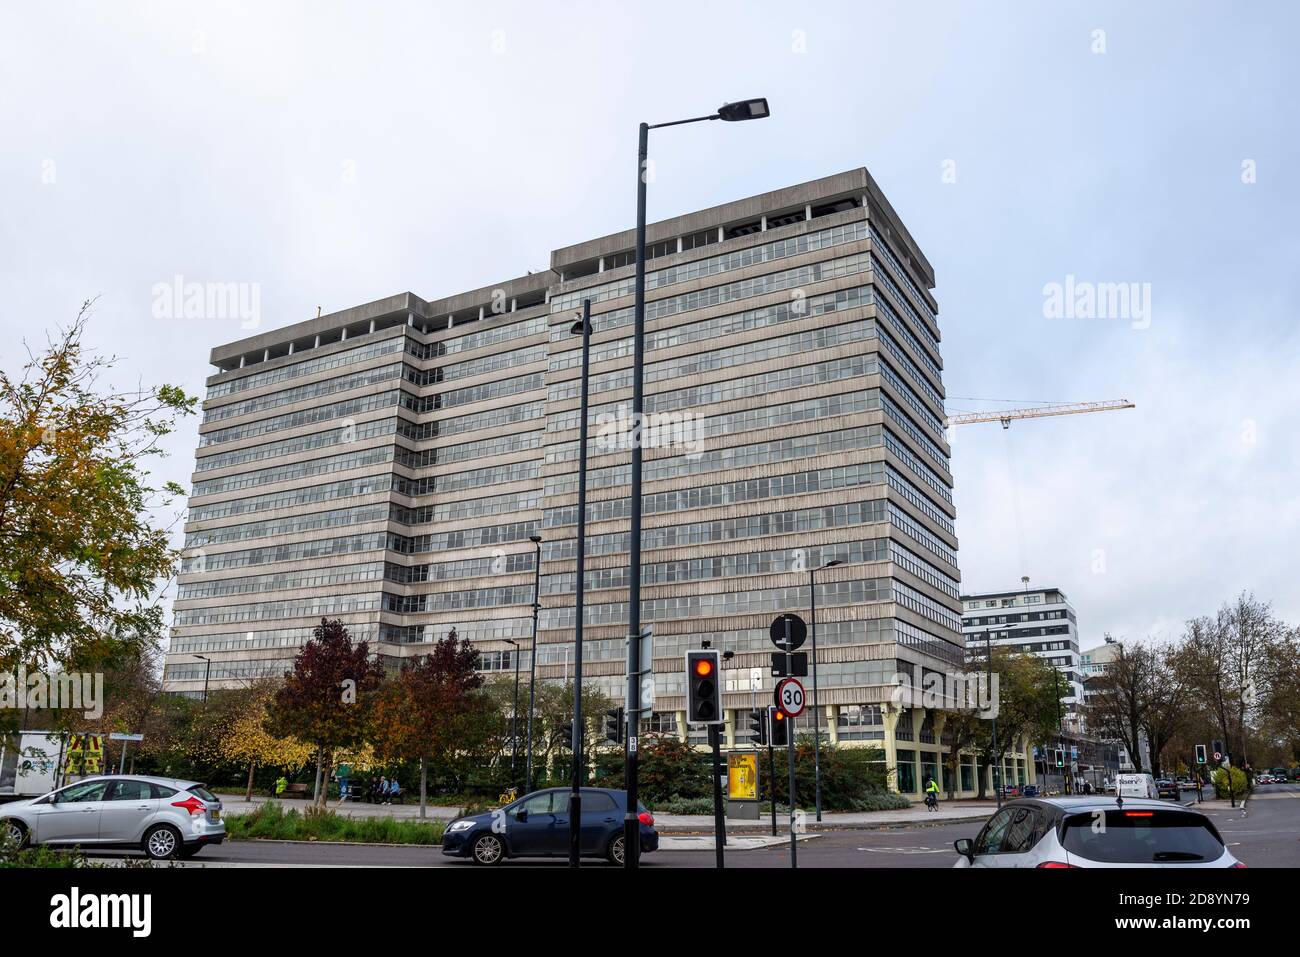 HMRC Alexander House, Queensway, Southend on Sea, Essex. HM revenue and customs office. Office block. Tax office building. Space for rent by Comer Grp Stock Photo